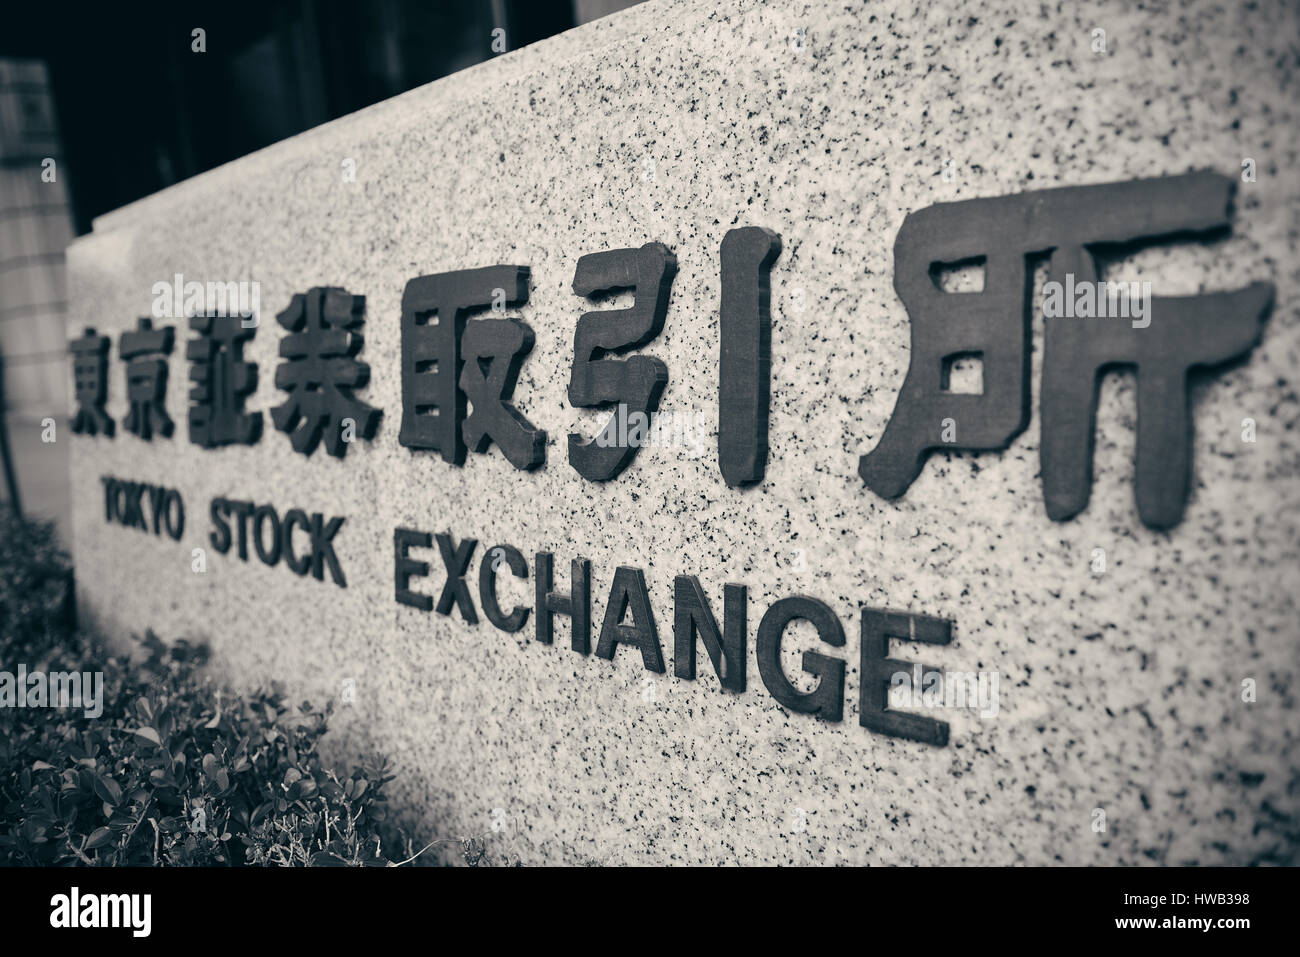 TOKYO, JAPAN - MAY 15: Tokyo Stock Exchange in financial district on May 15, 2013 in Tokyo. Tokyo is the capital of Japan and the most populous metrop Stock Photo